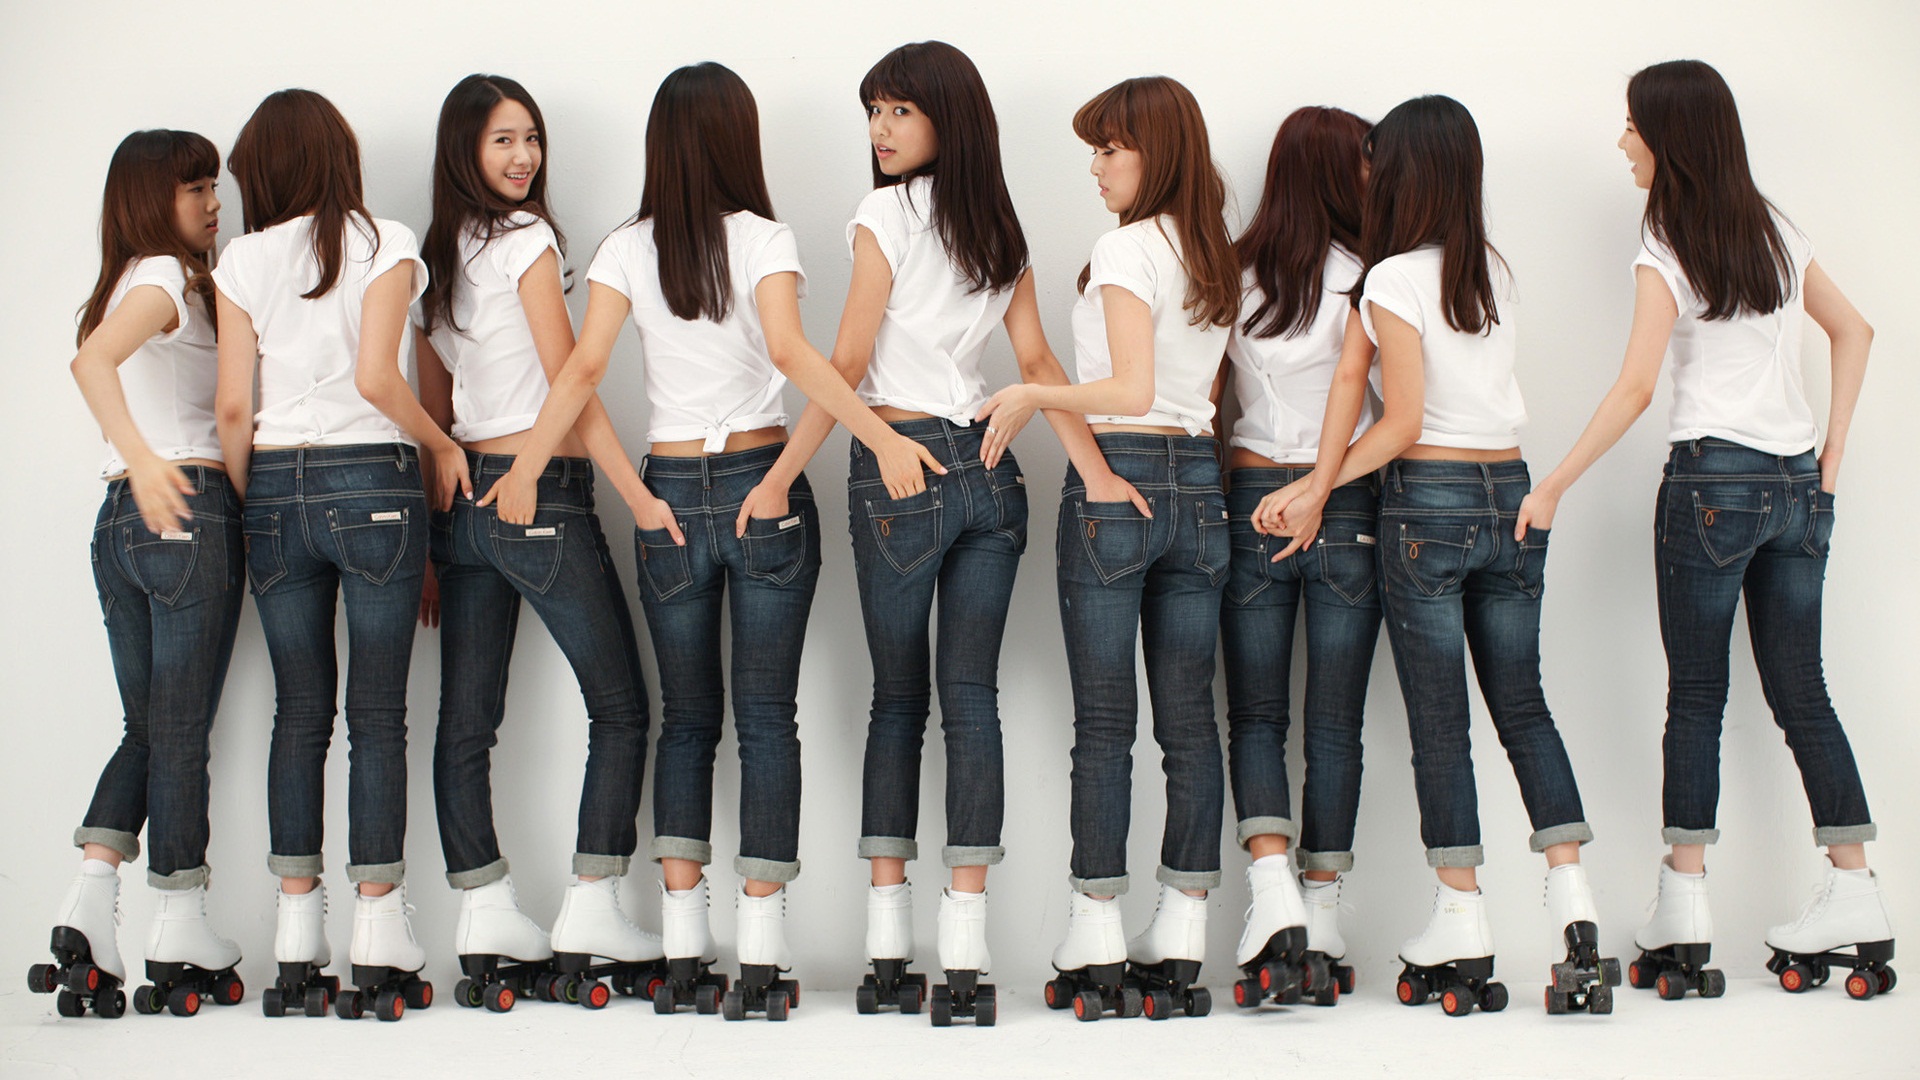 Girls Generation latest HD wallpapers collection #13 - 1920x1080